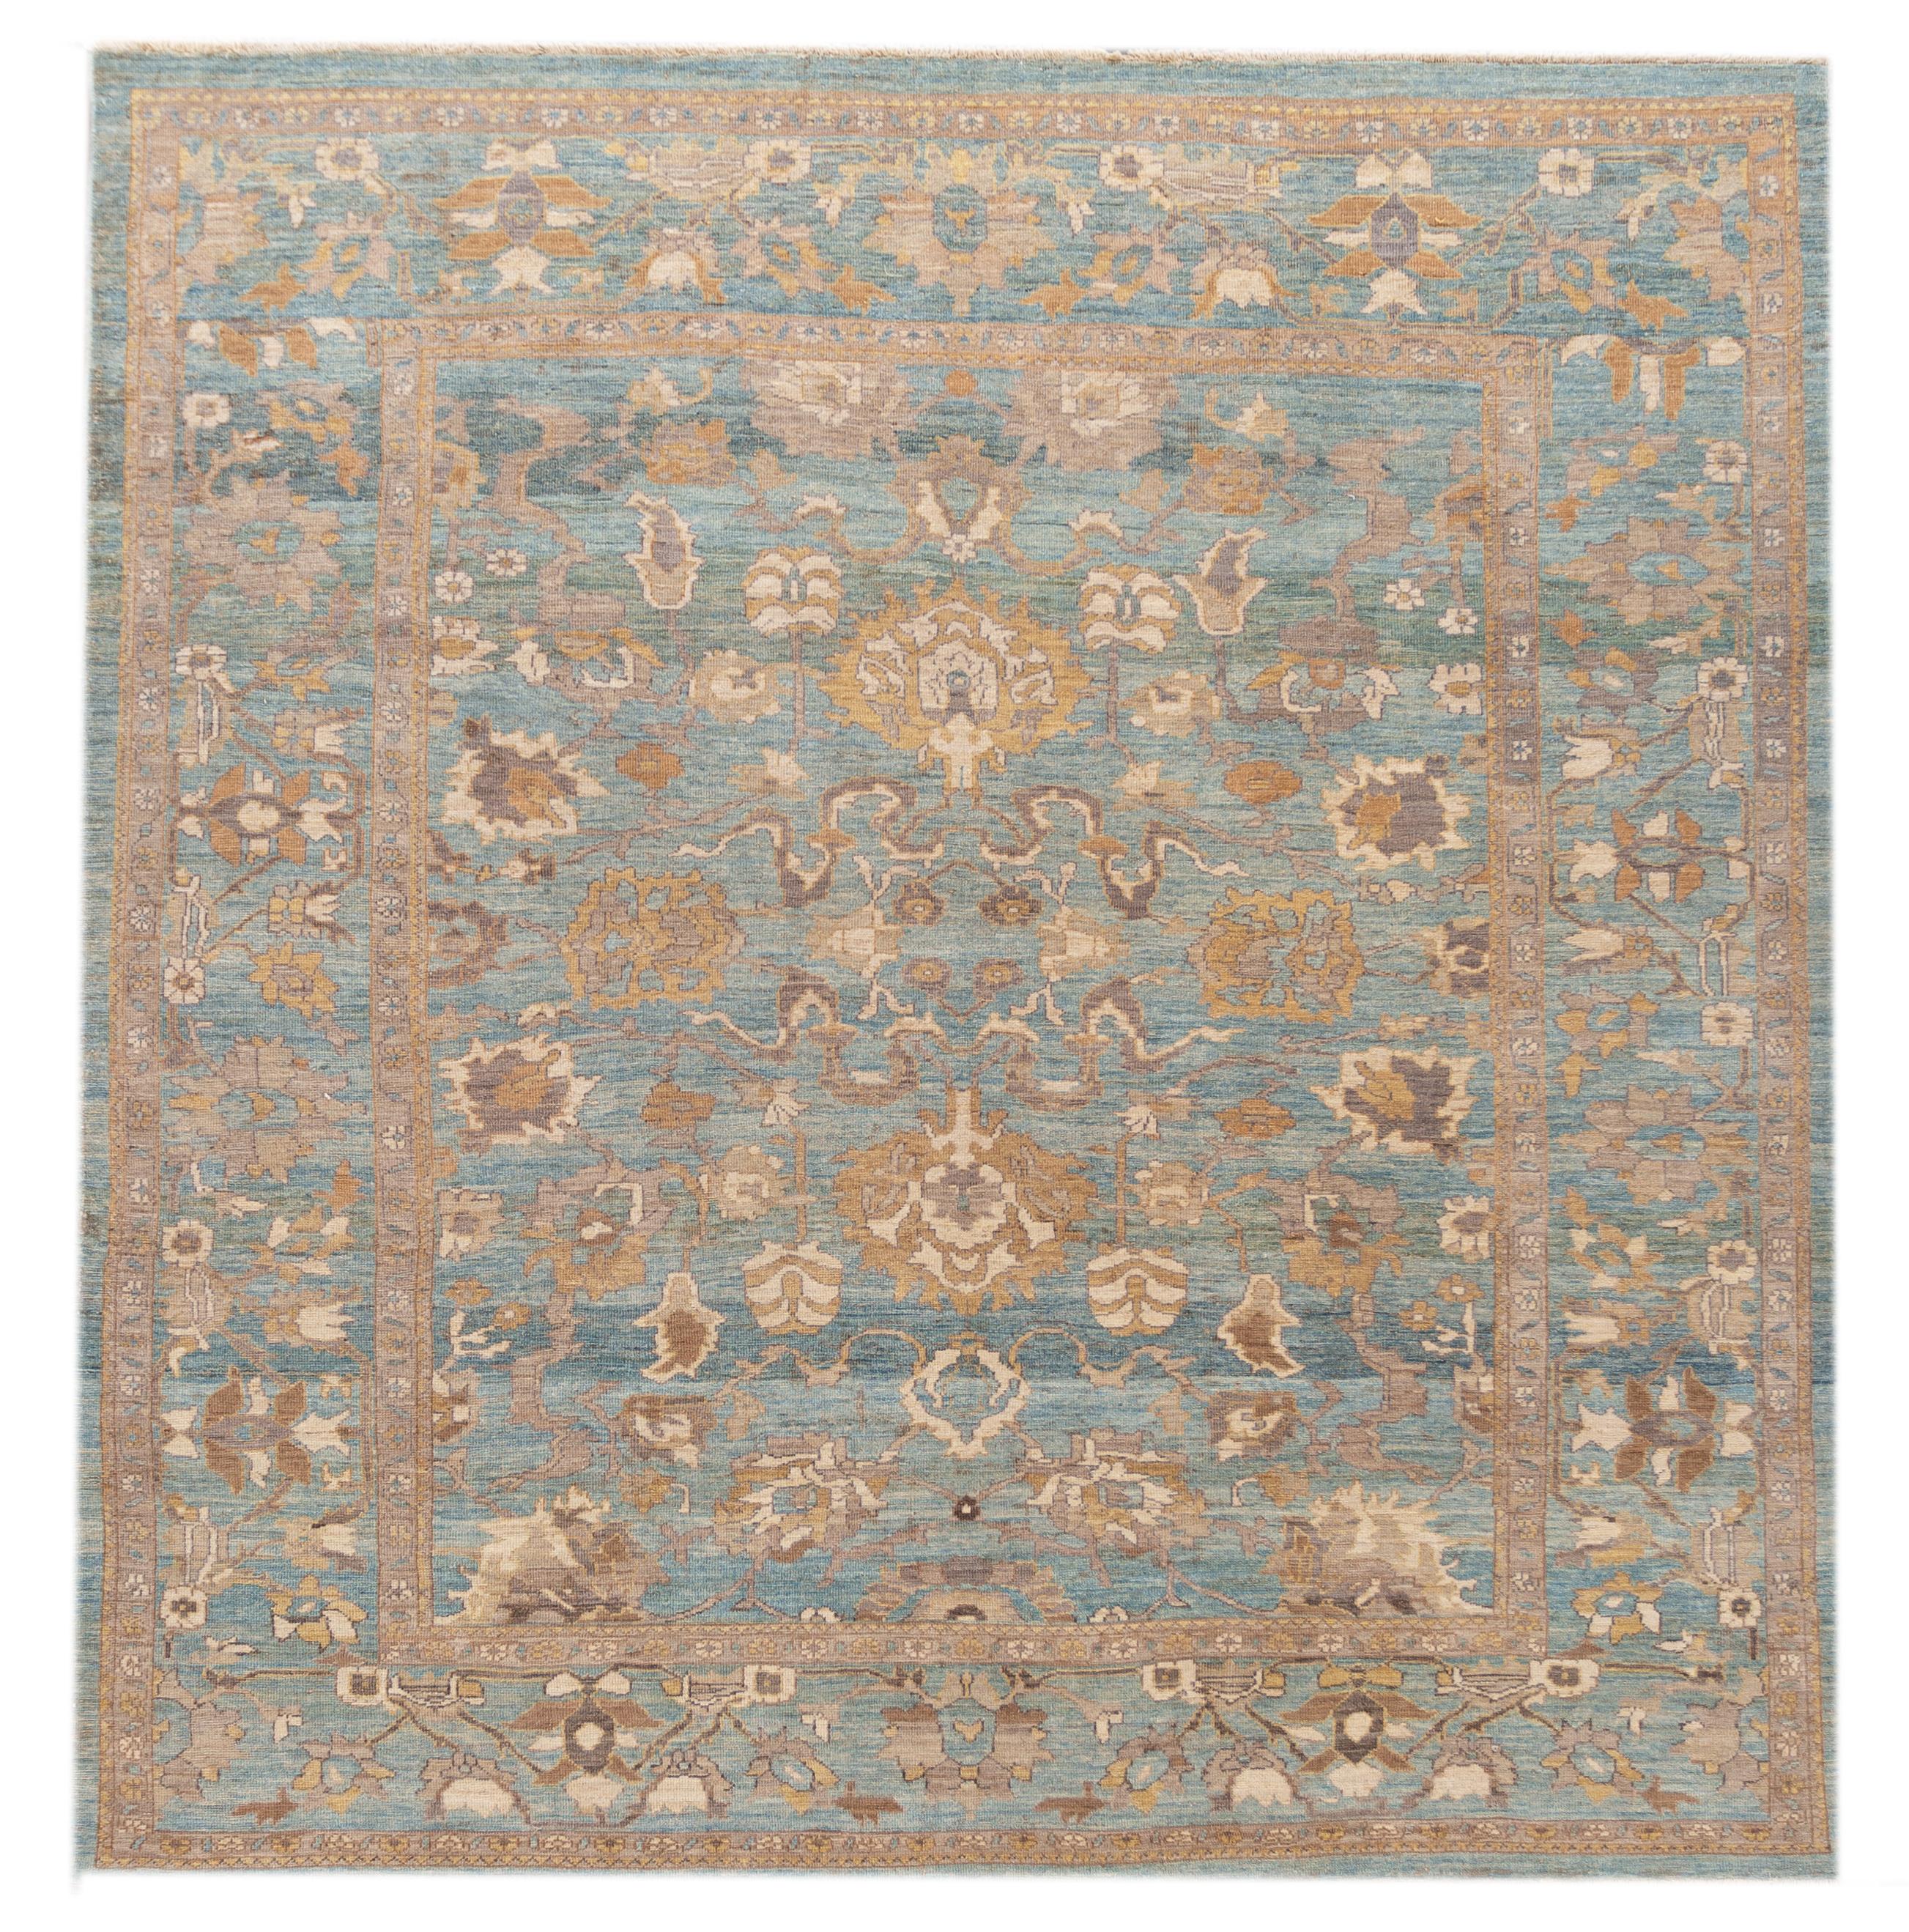 This beautiful modern Persian Sultanabad hand-knotted design rug will make your floor look splendid. This collection is of wool and made in Iran. It measures are: 9'9